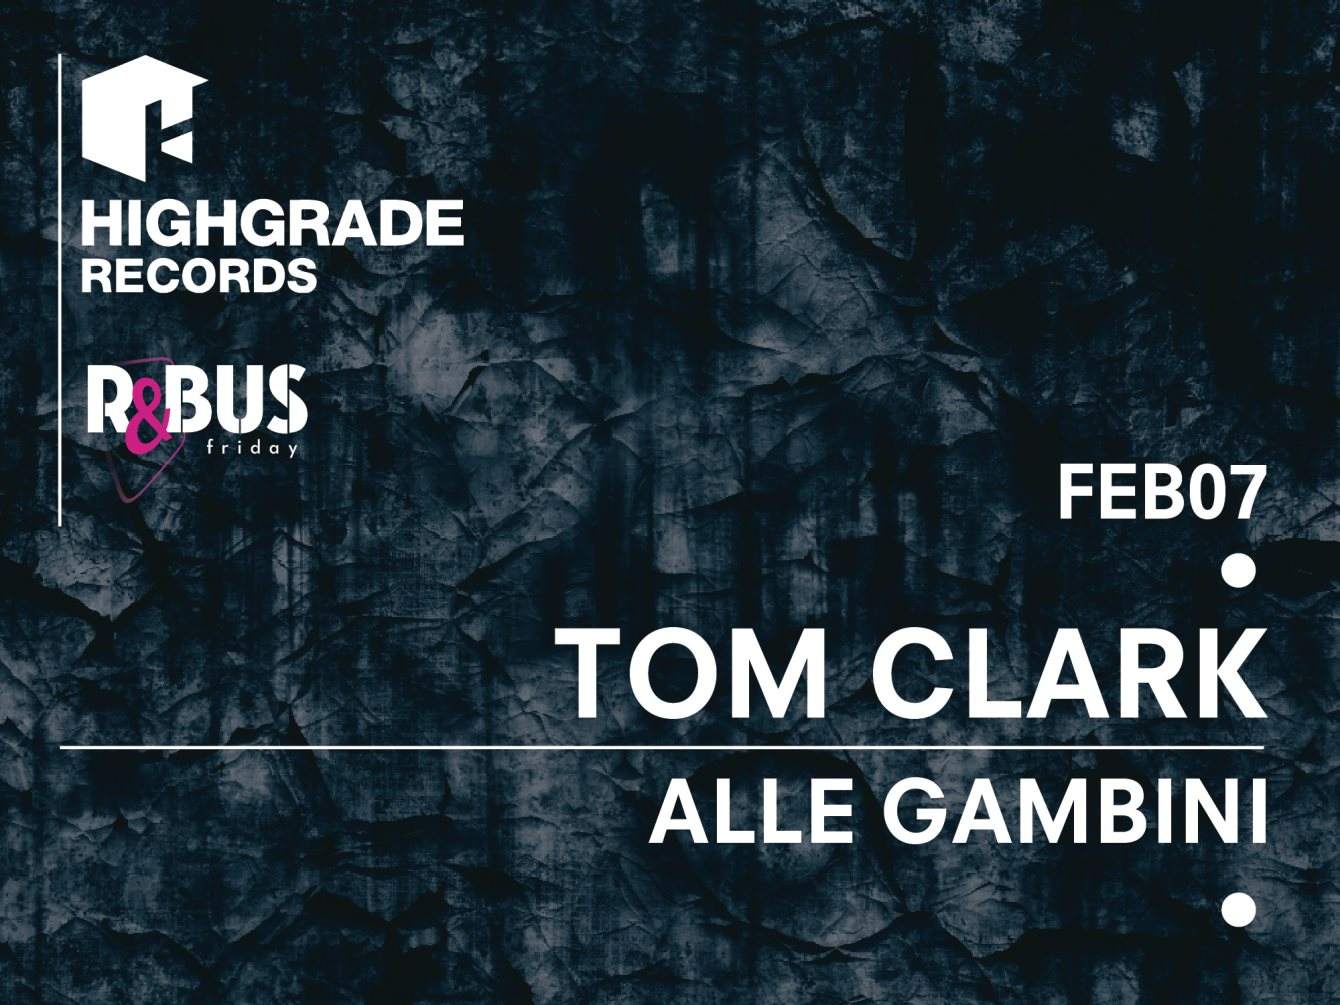 R&bus Friday with Tom Clark & Alle Gambini - Página frontal